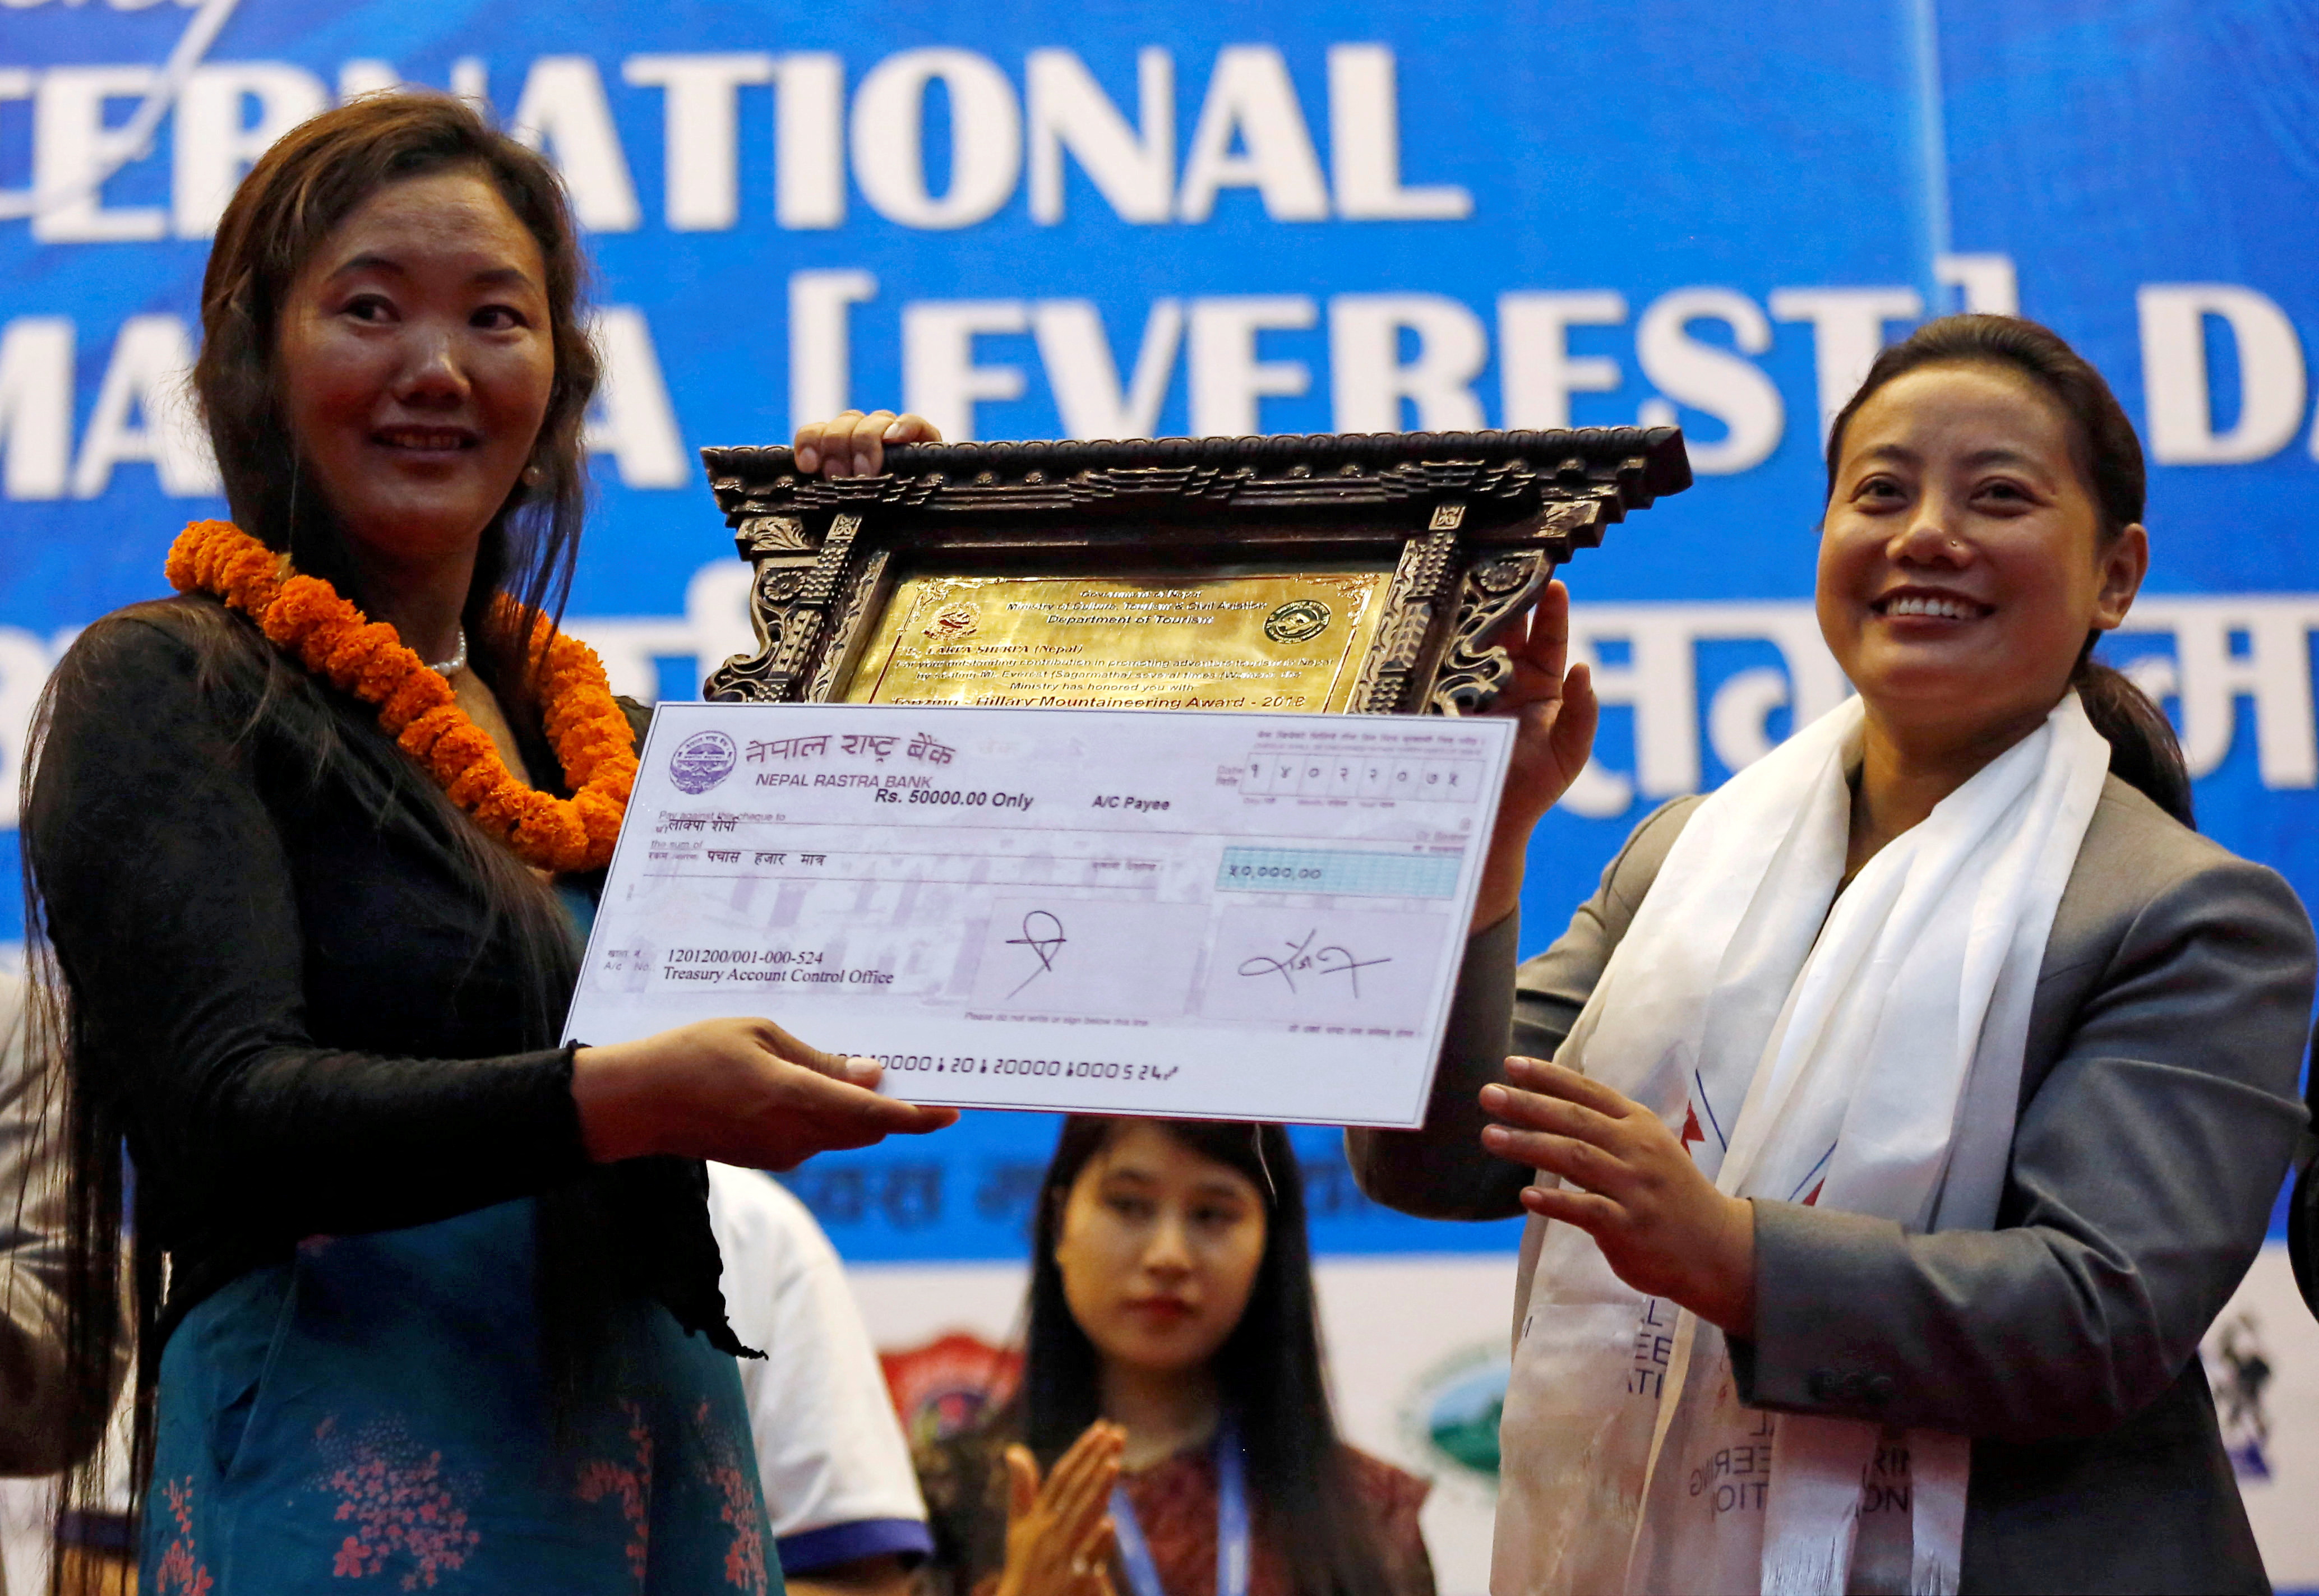 Lhakpa Sherpa, 44, a Nepali mountaineer who climbed Mount Everest 9 times, receives Tenzing Ð Hillary Mountaineering Award during the function to mark the International Everest day in Kathmandu